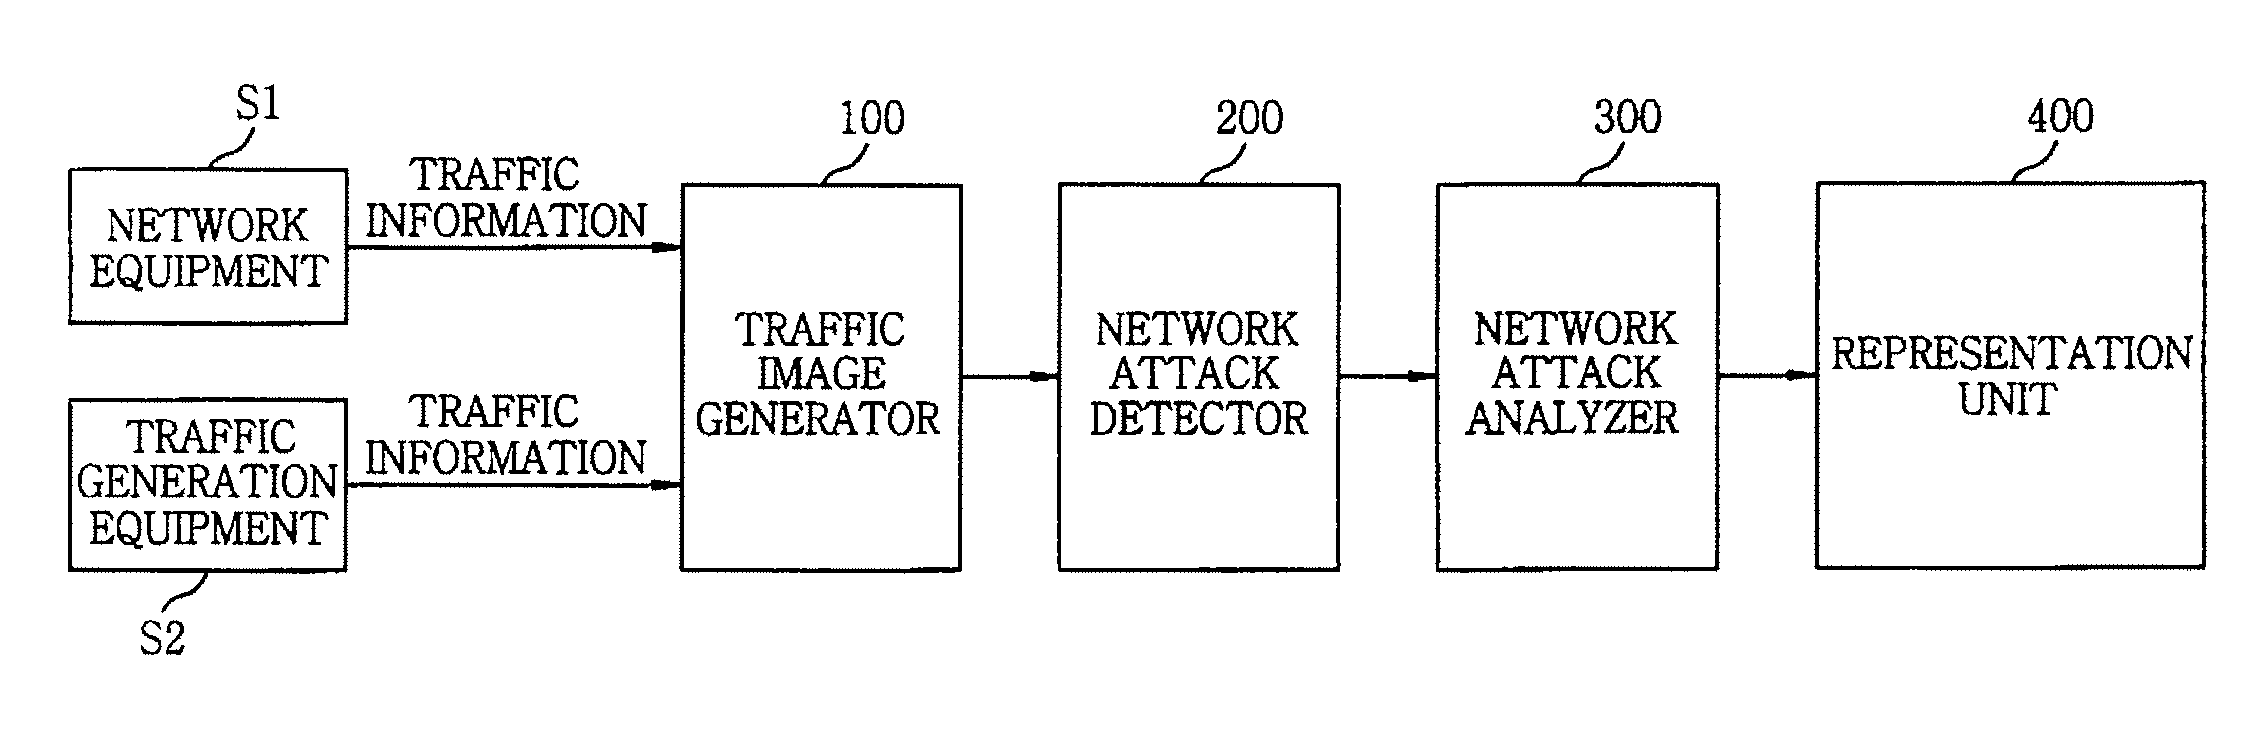 Apparatus and method for detecting network attack based on visual data analysis